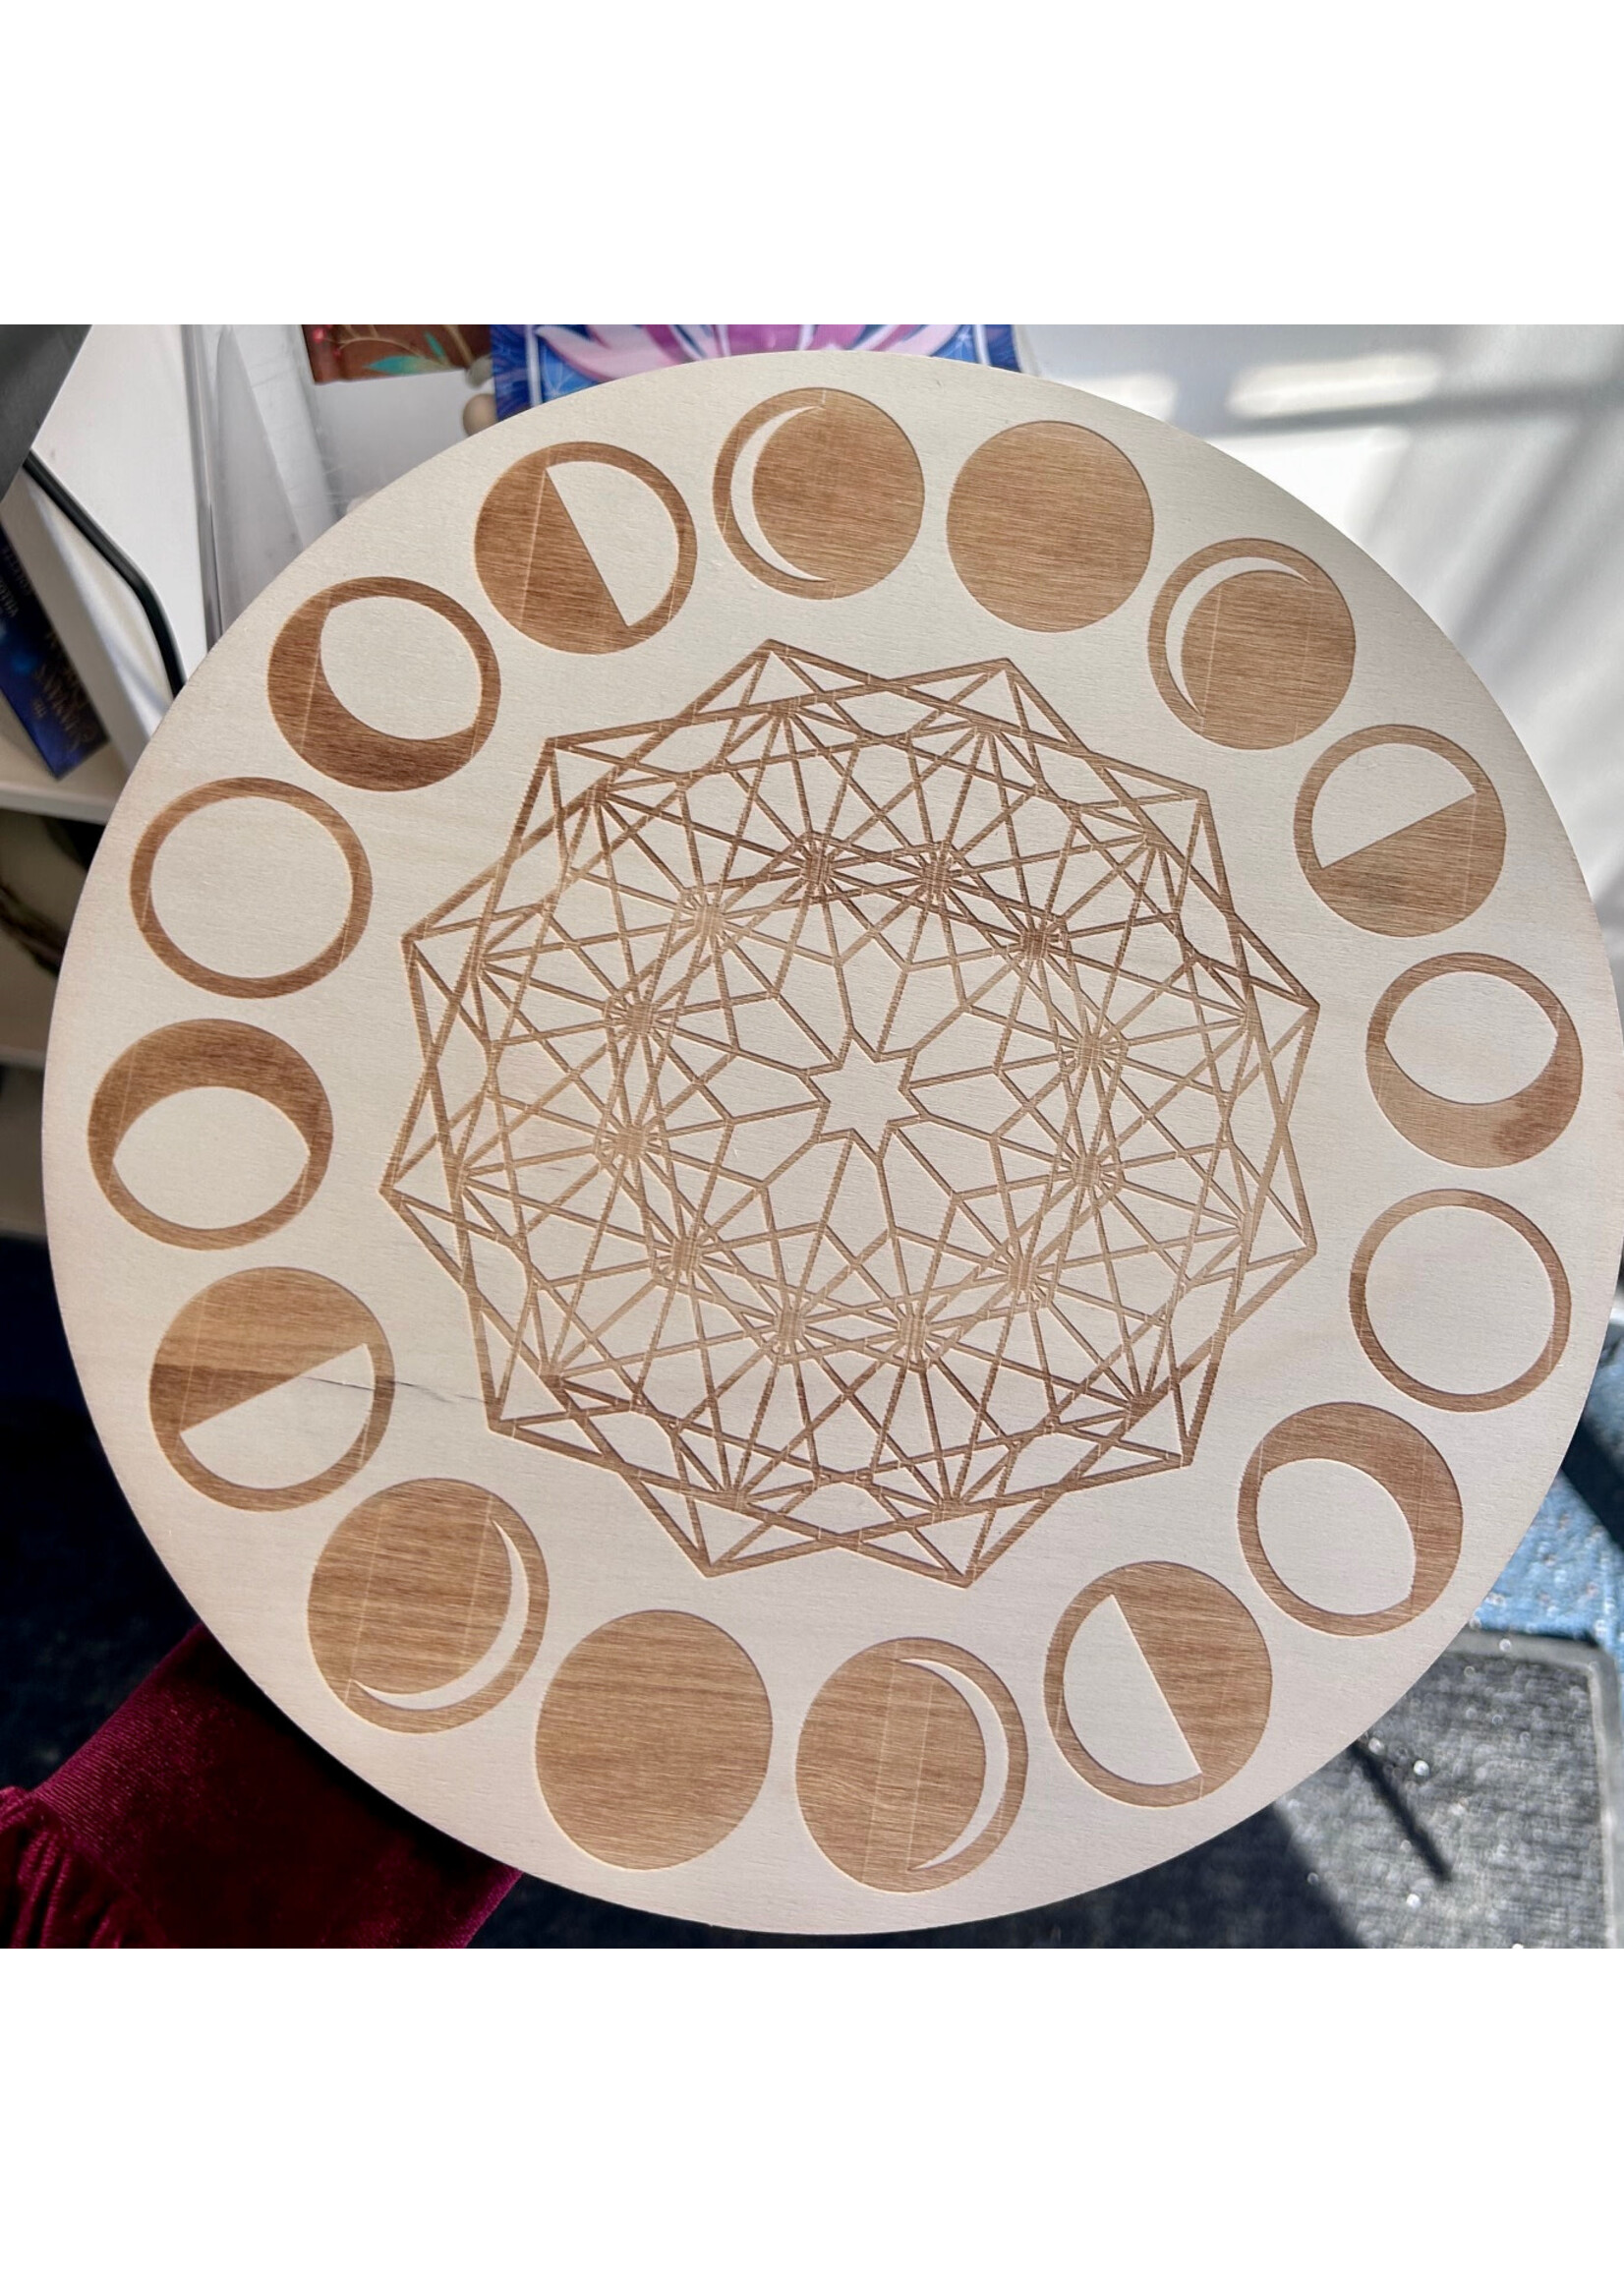 Moon Cycles Grid Plate